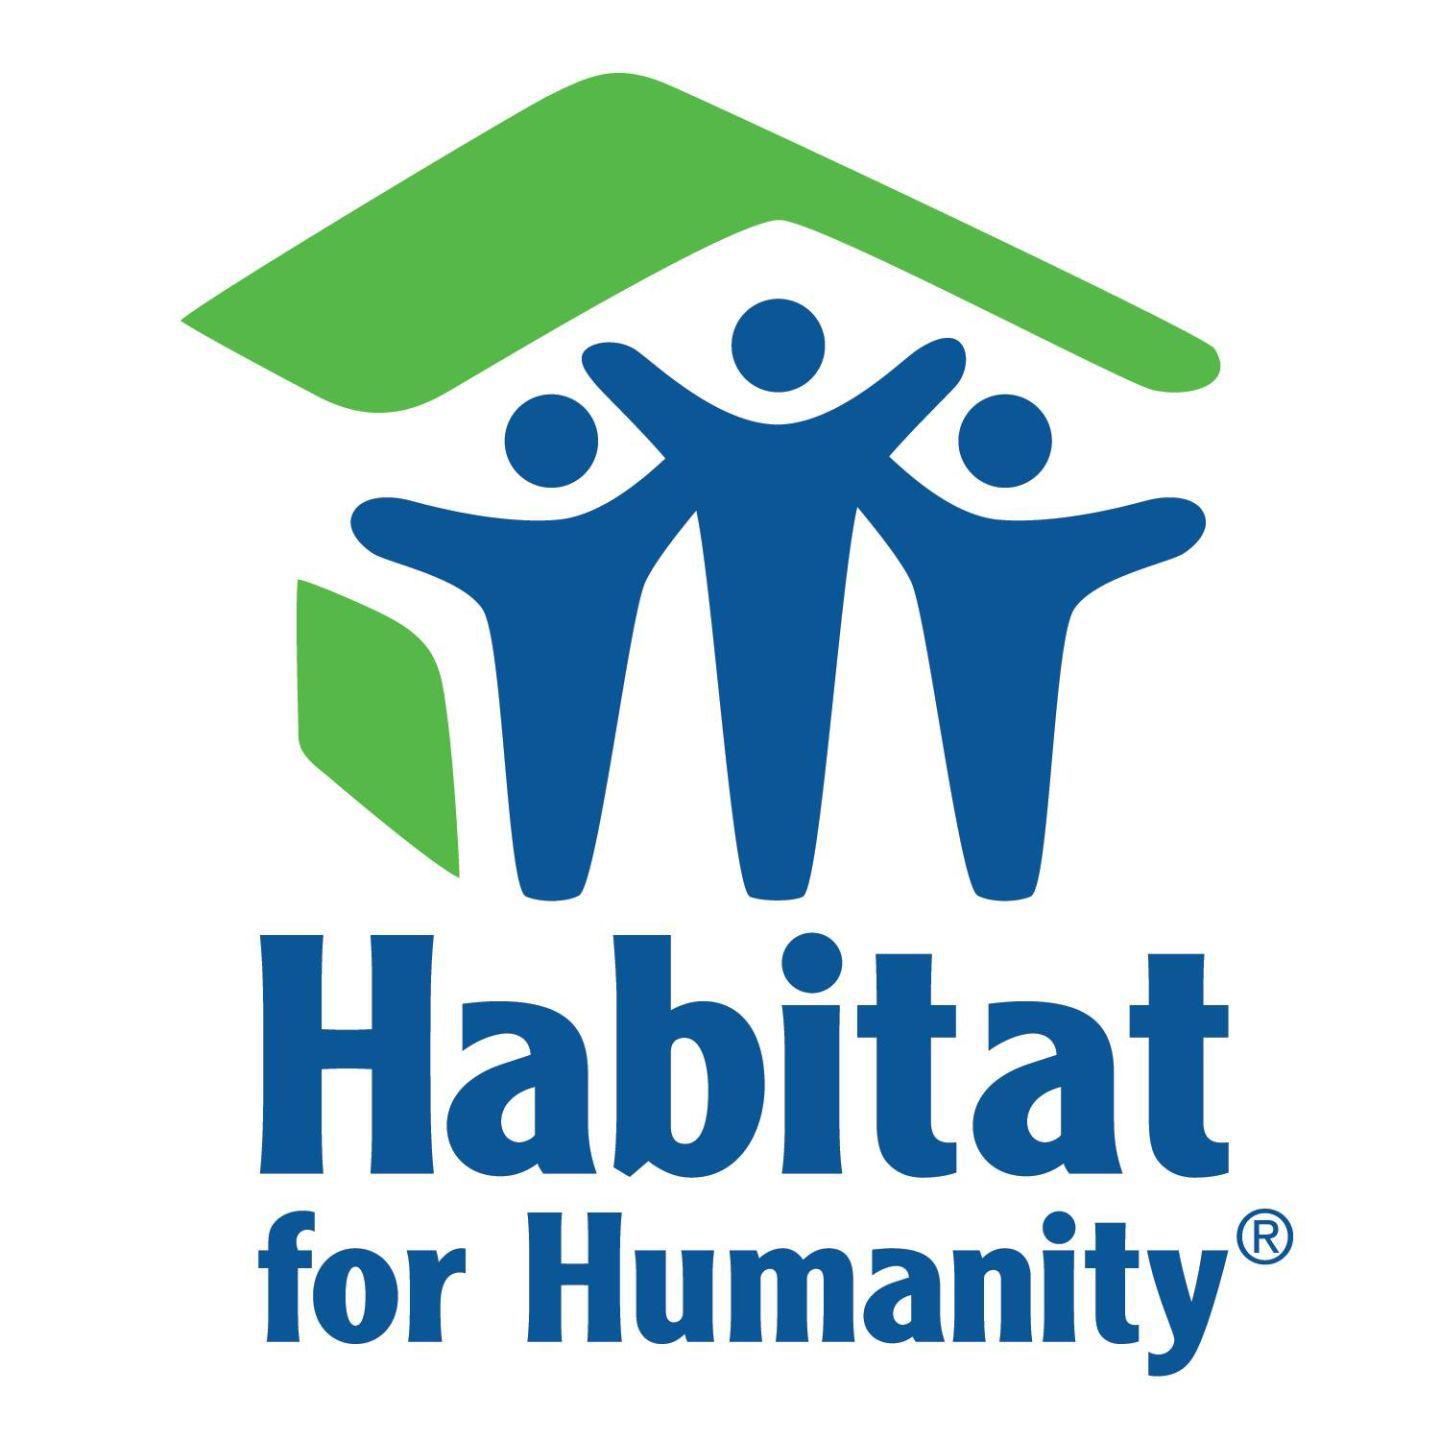 Helped build five houses in 5 days for Habitat for Humanity in Romania.